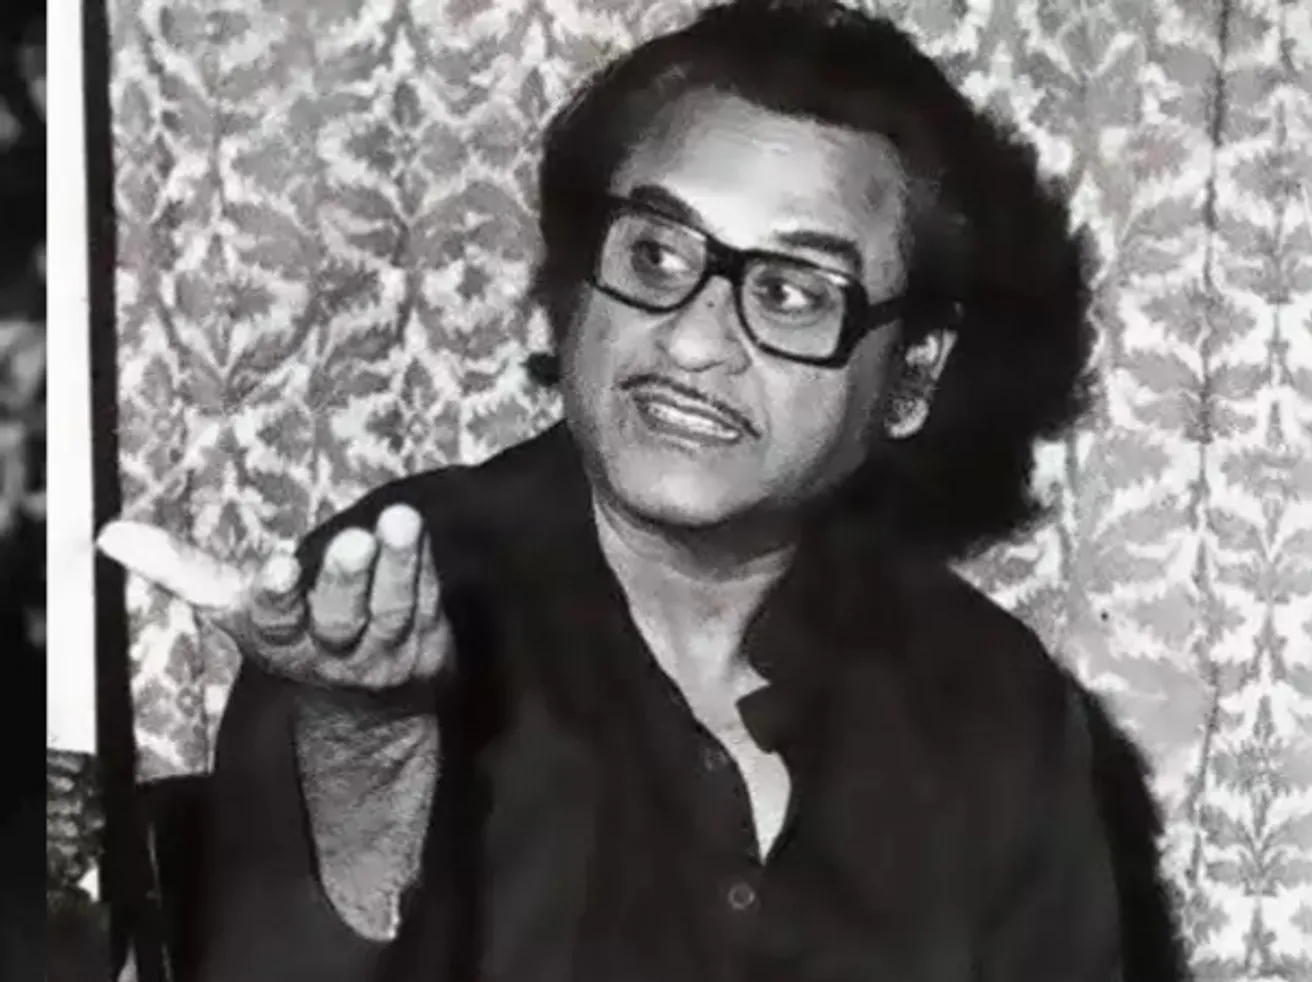 Kishore Kumar's popularity and the magic of his voice